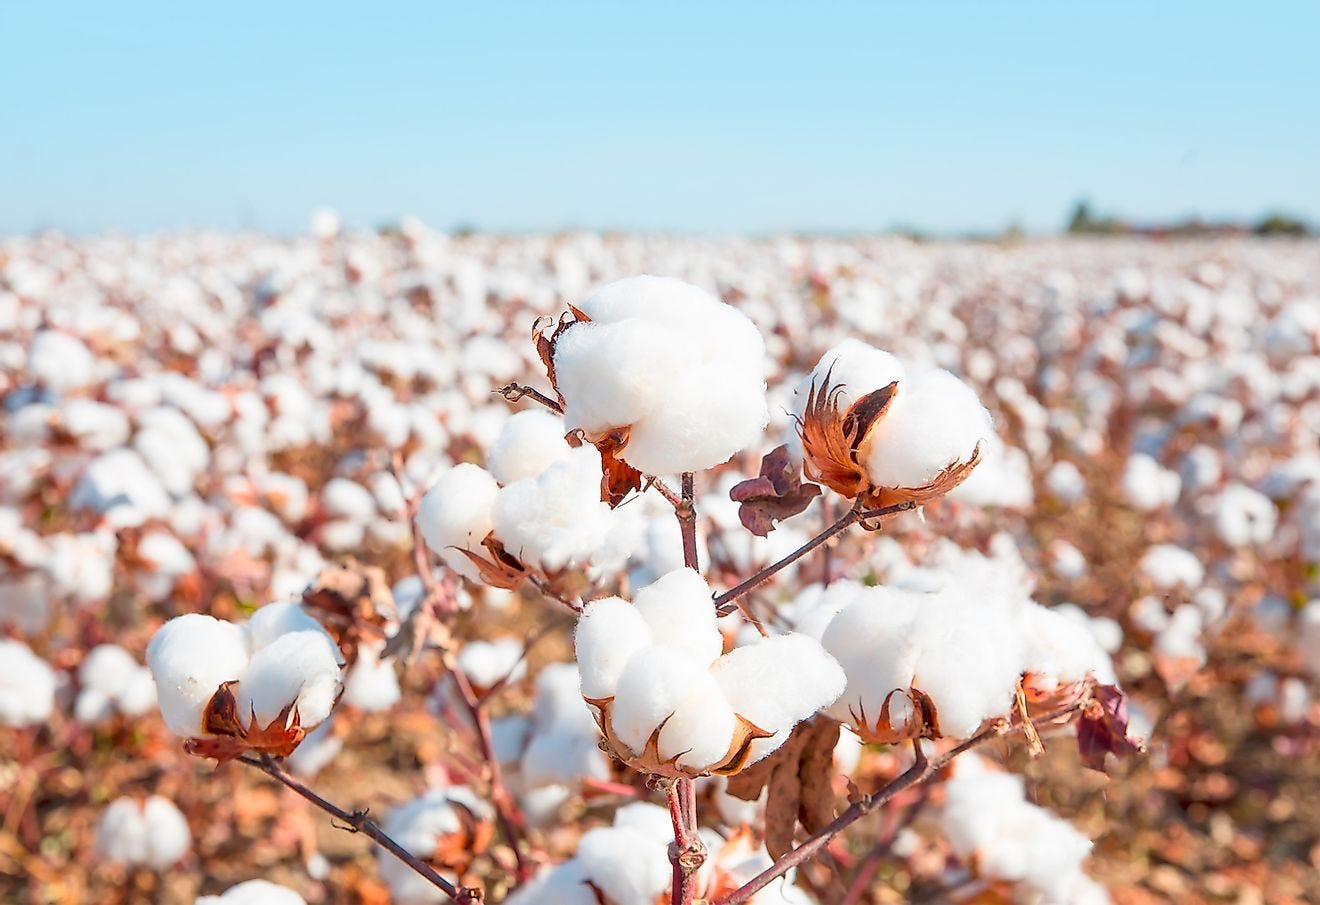 How Cotton Harms the Environment & Human Health